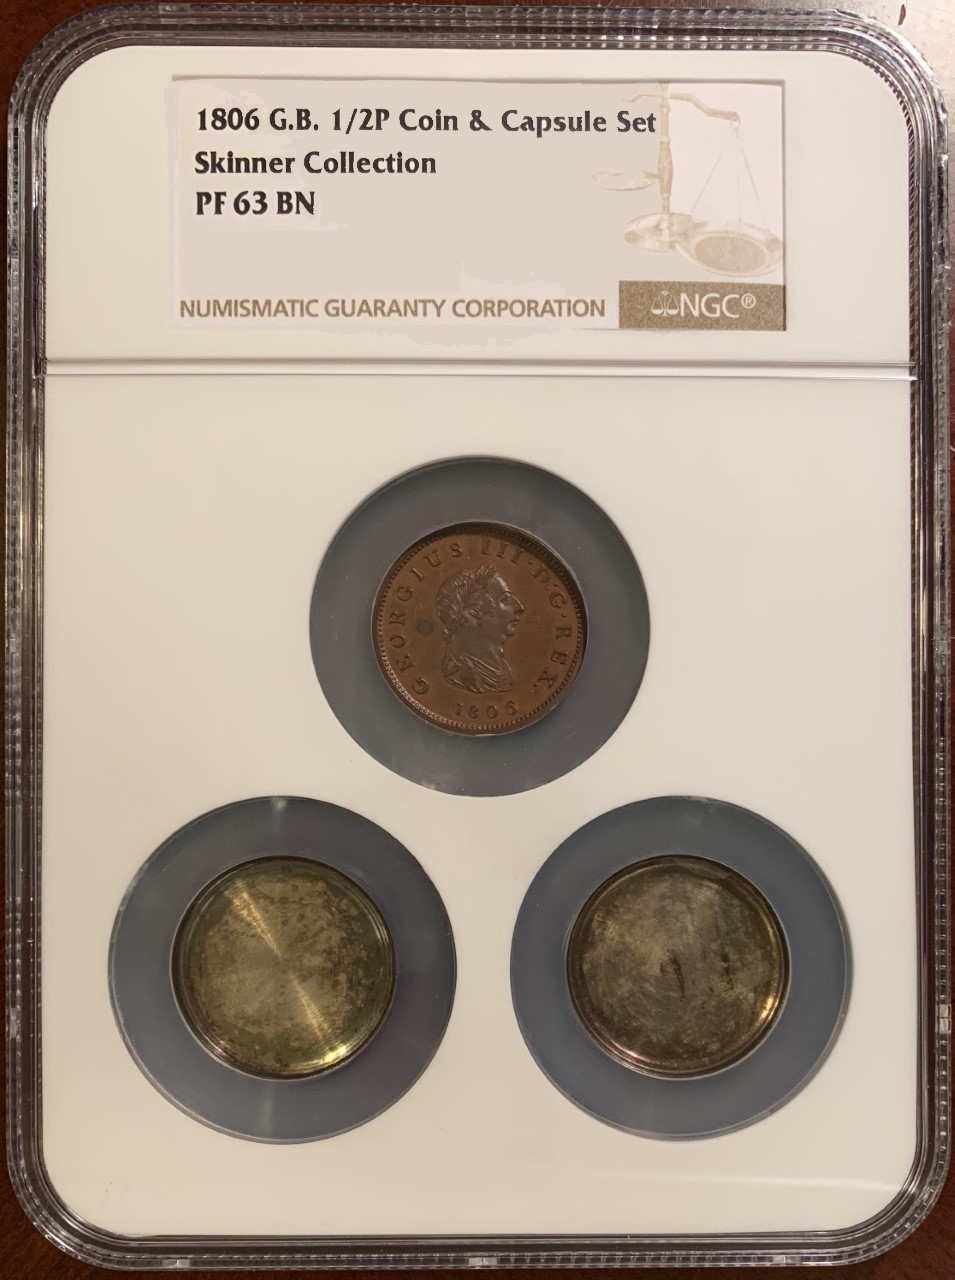 1806 Great Britain Proof Half Penny P-1371 with shells NGC PF-63 BN Skinner Collection Obv..jpg